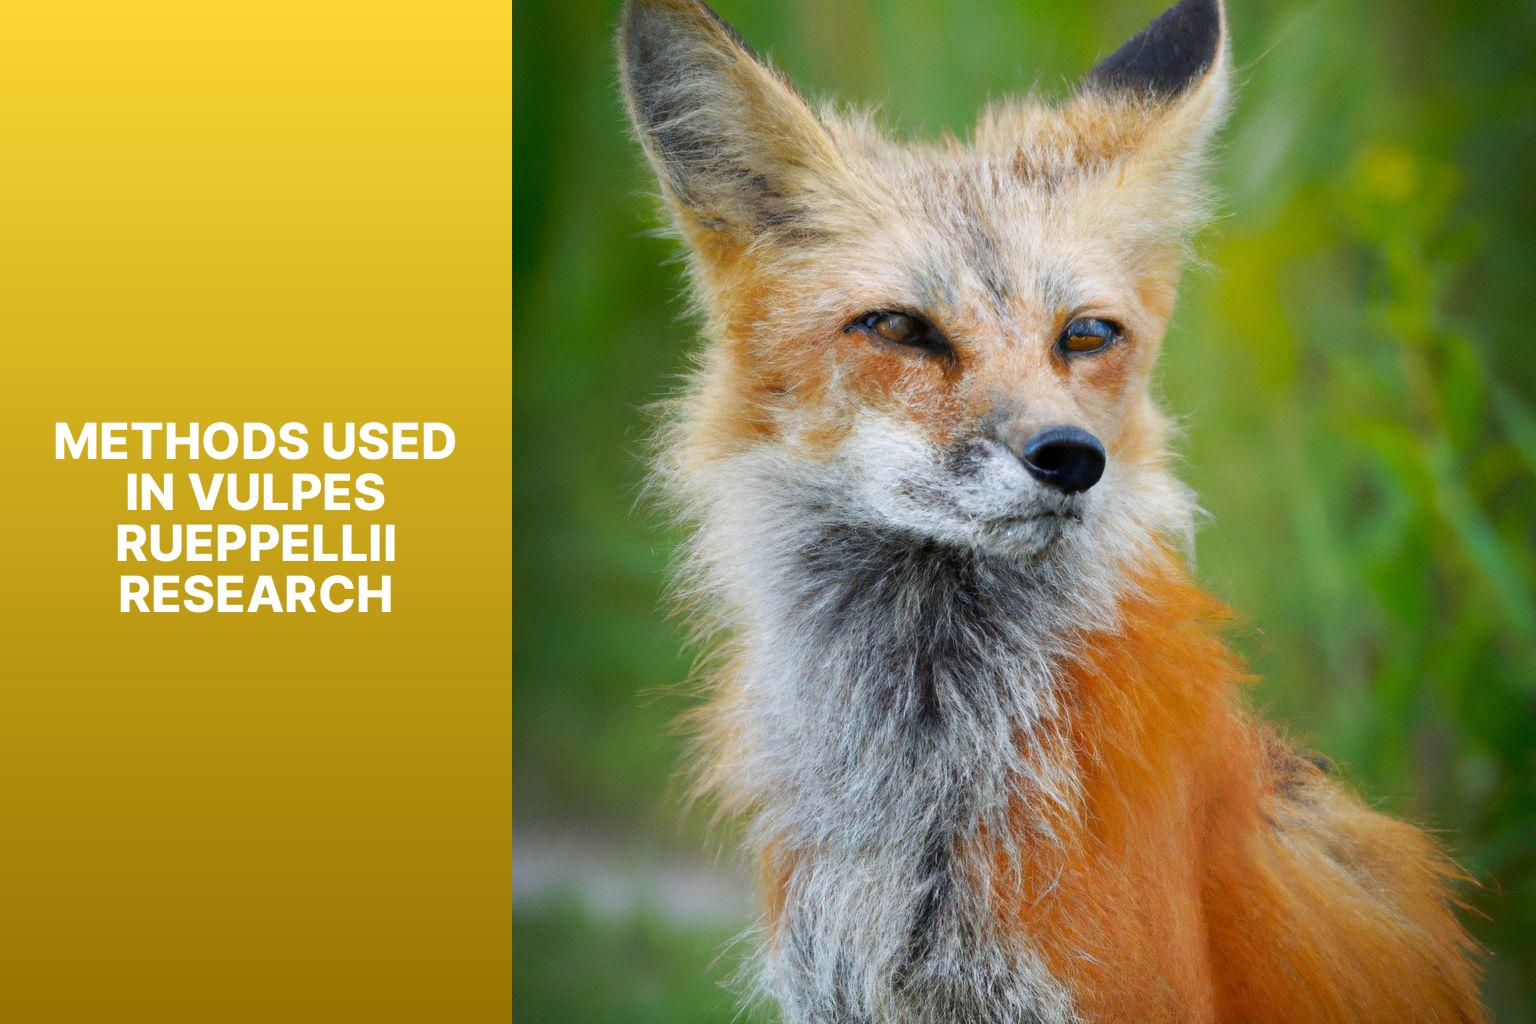 Methods Used in Vulpes rueppellii Research - Vulpes rueppellii Scientific Research 